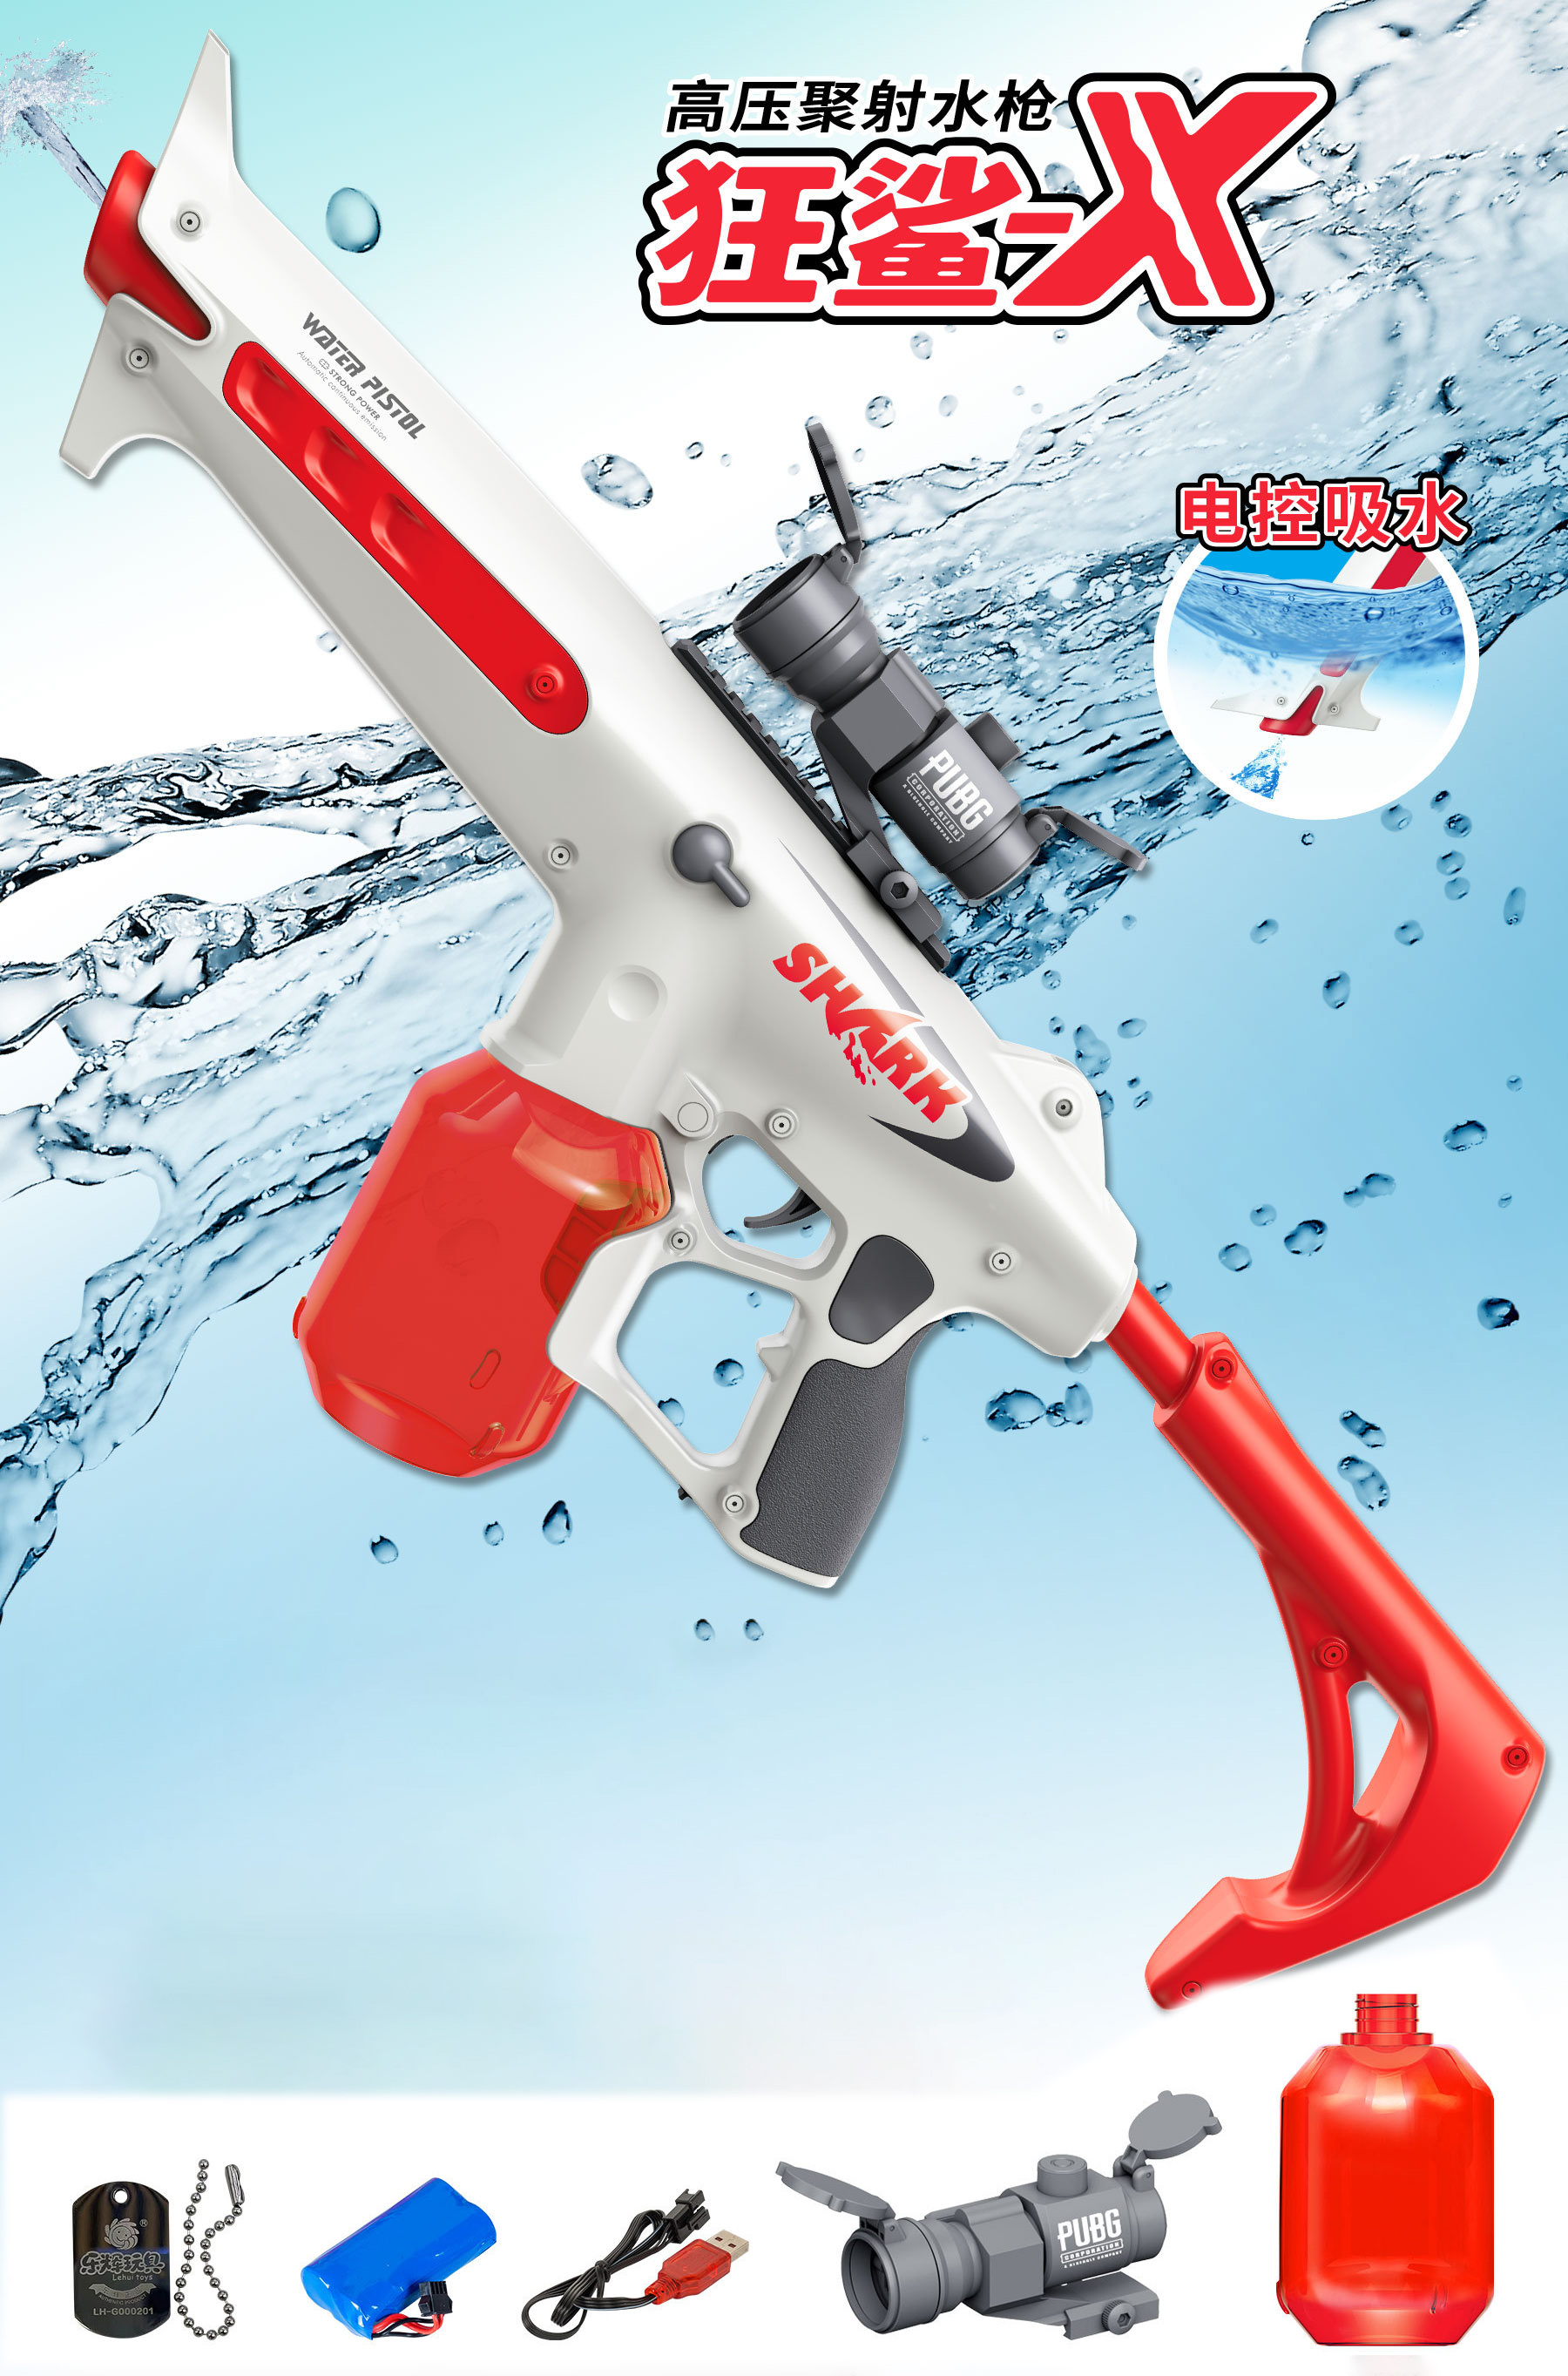 Arctic Shark 81CM Large size, Big scale Electric Fully Automatic Water Gun Toy, Self-Absorbing High Water Pressure Long Range Adult Outdoor Beach Pool Water Toys